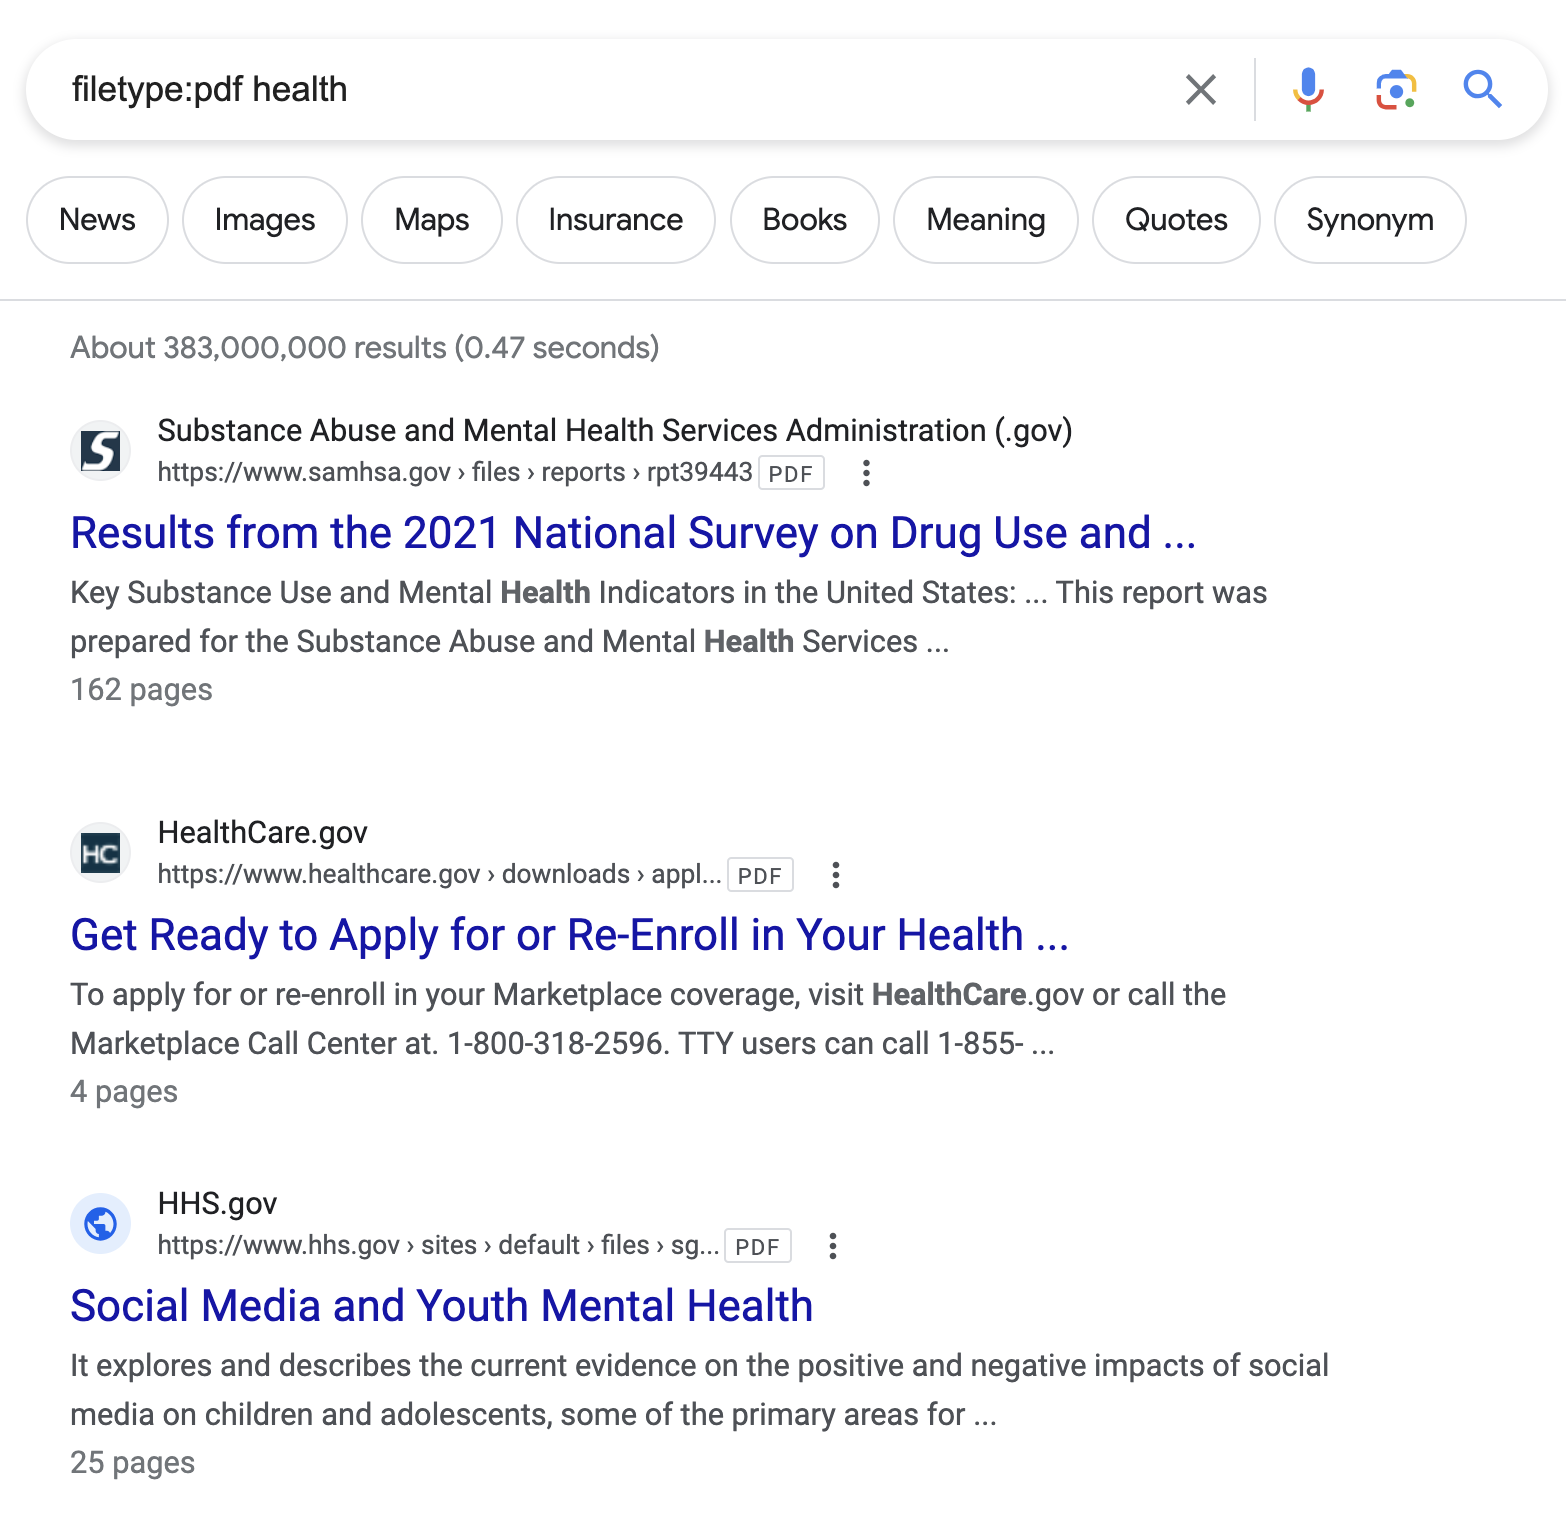 Google search results for “filetype:pdf health"